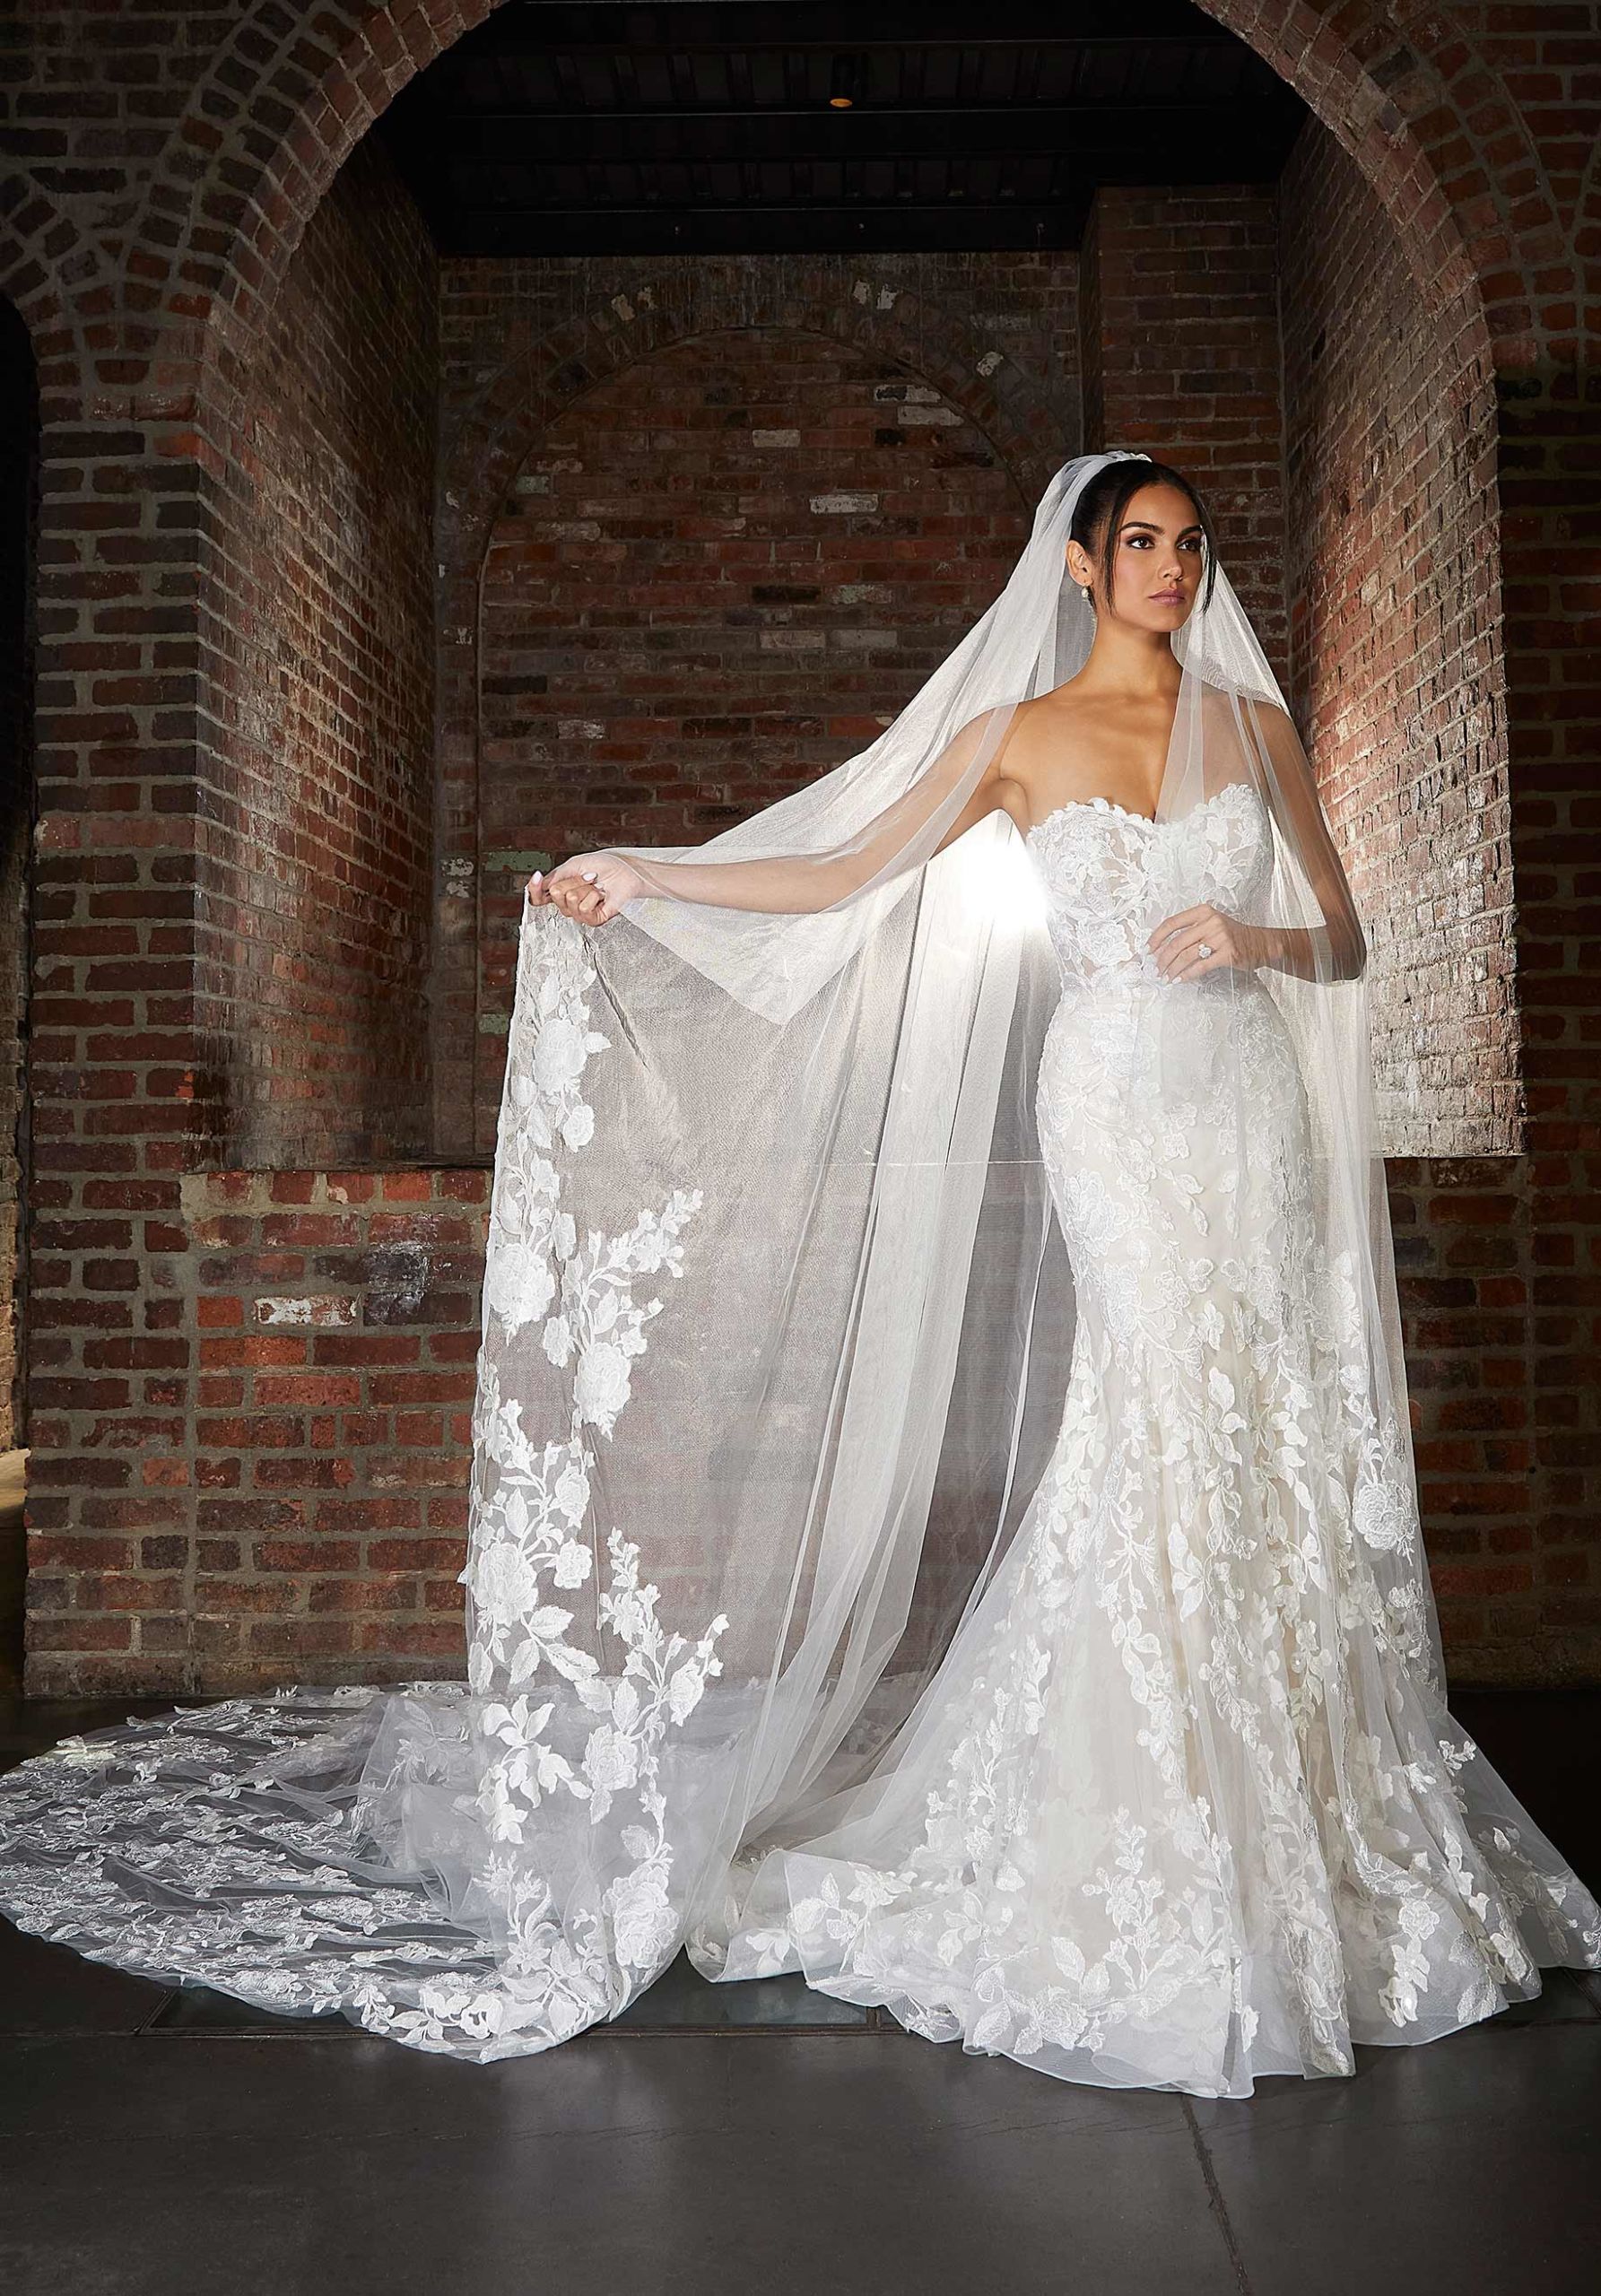 Morilee - Cathedral Length Veil with Frosted Lace Appliqués - STYLE #1201V